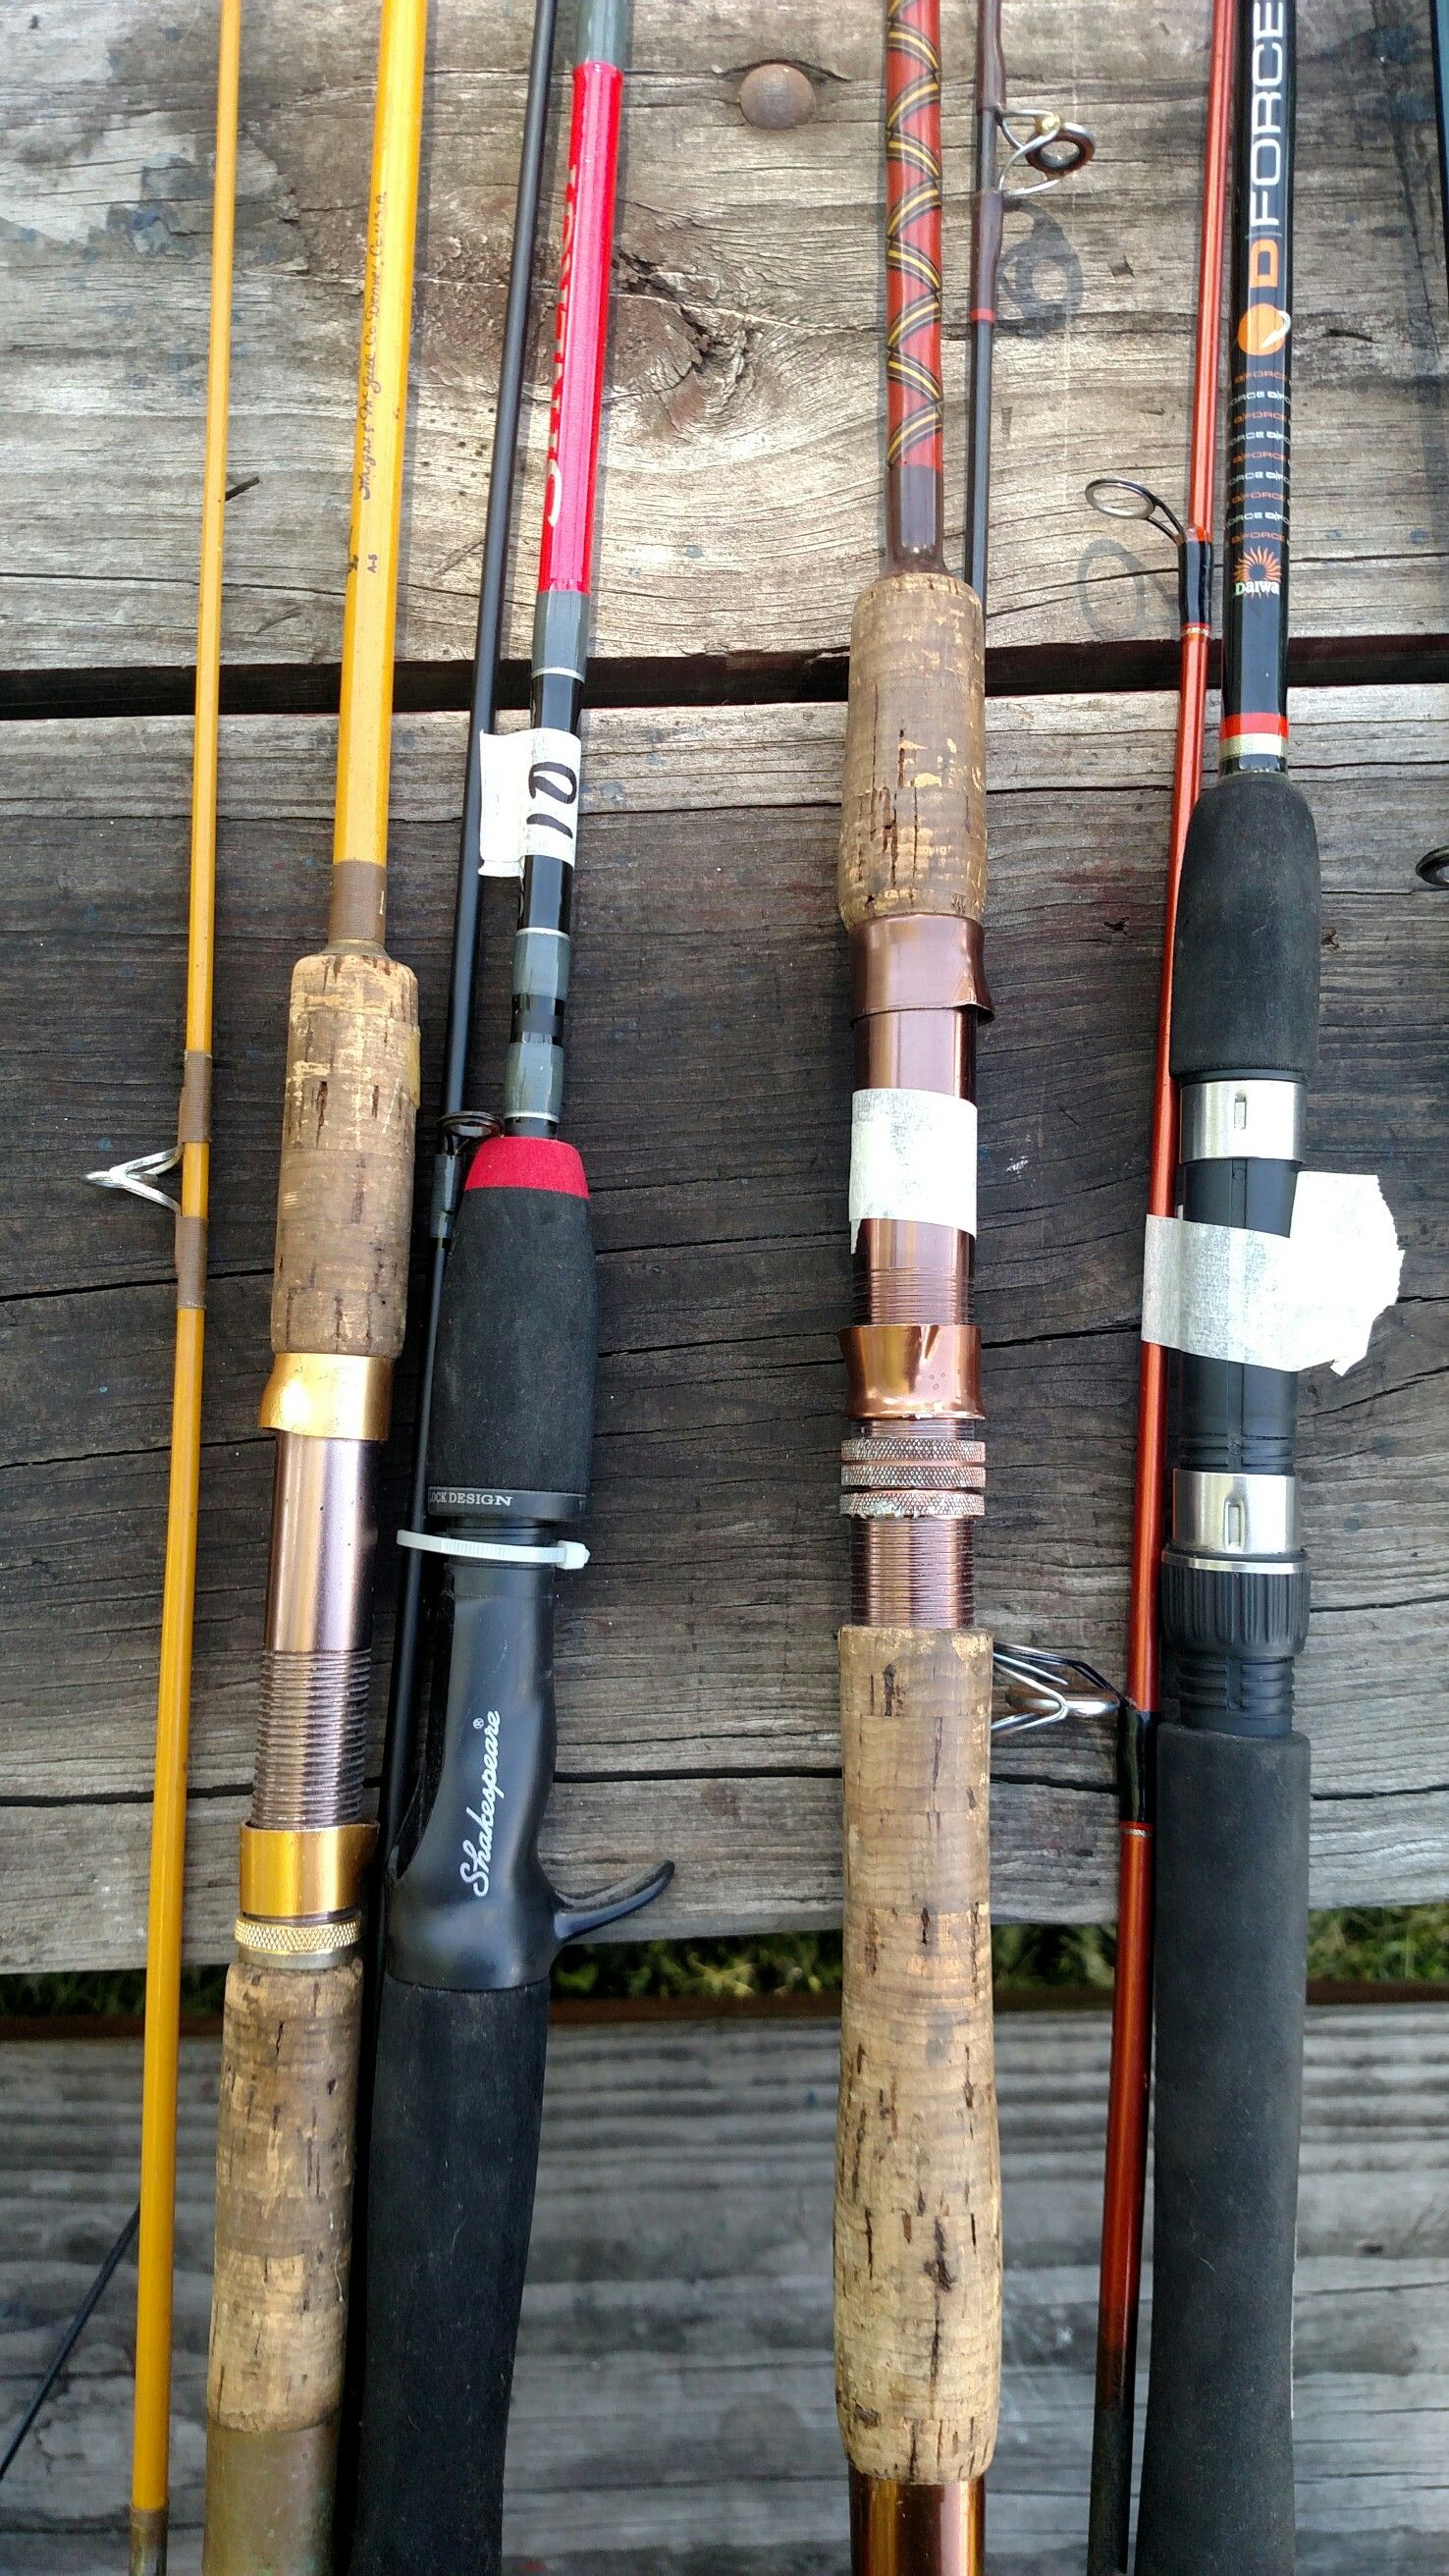 5 spinning rods fishing choice $10 each